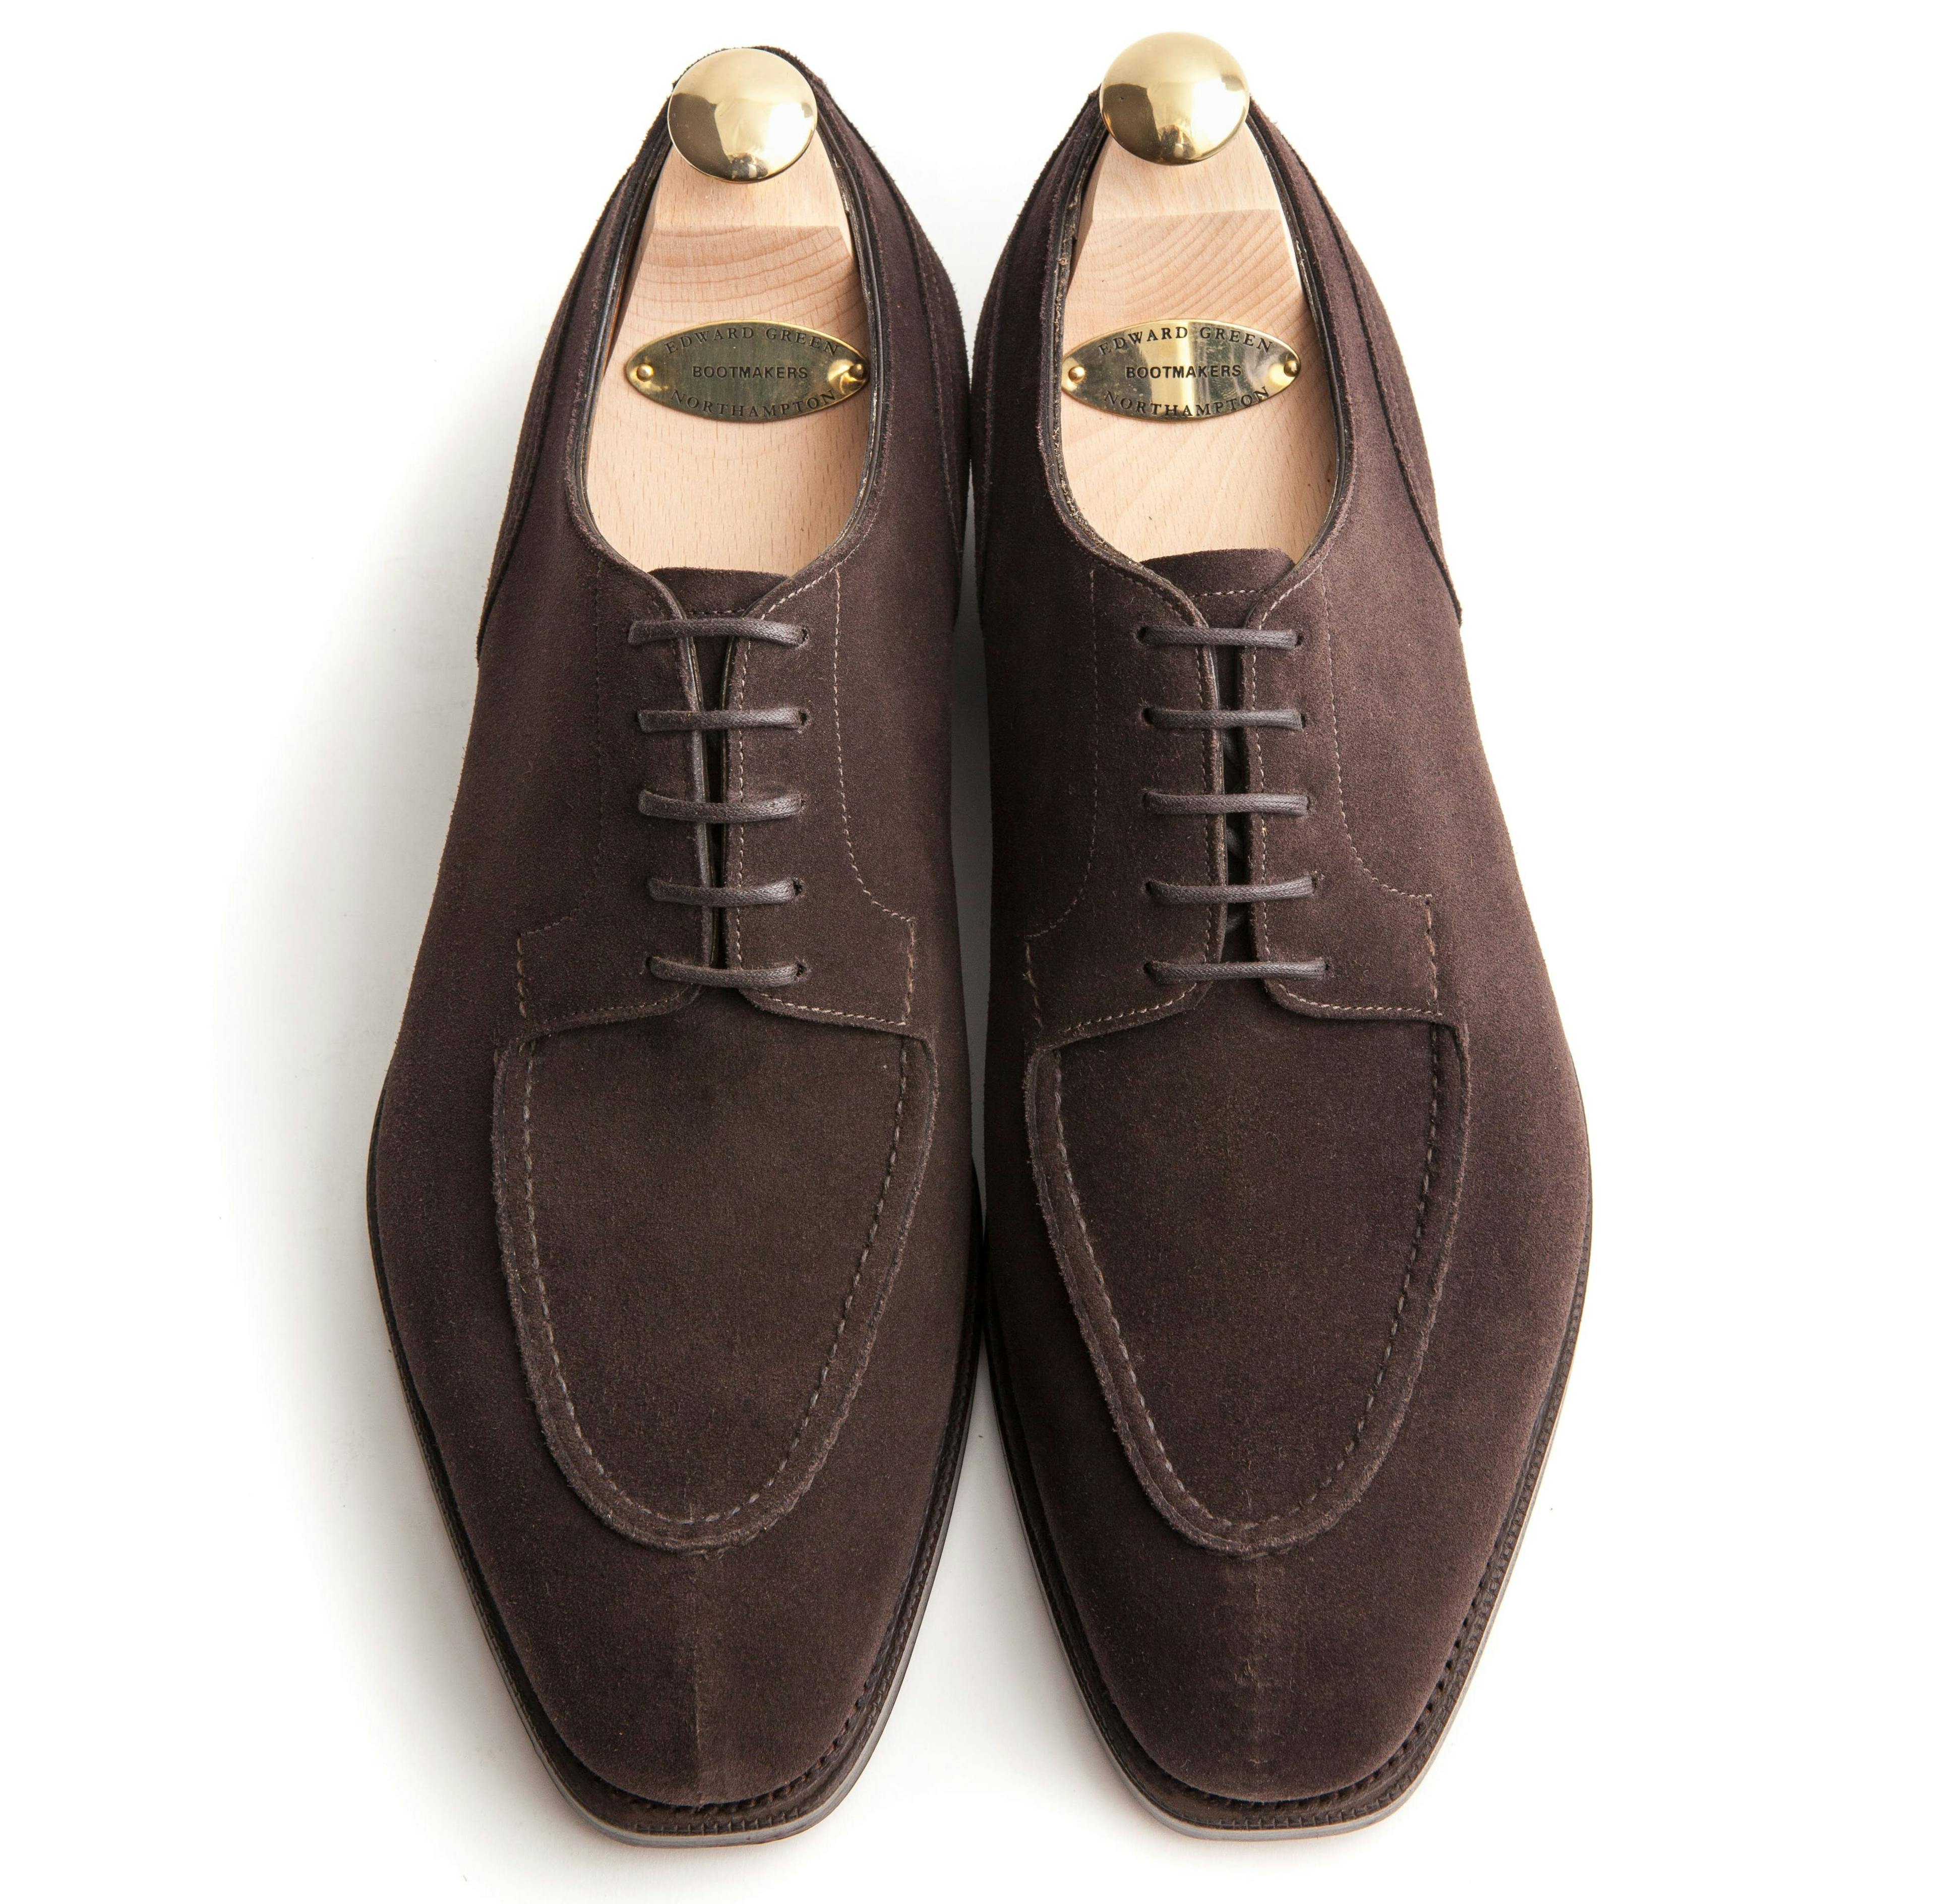 Top view of an Edward Green Dover in espresso suede.